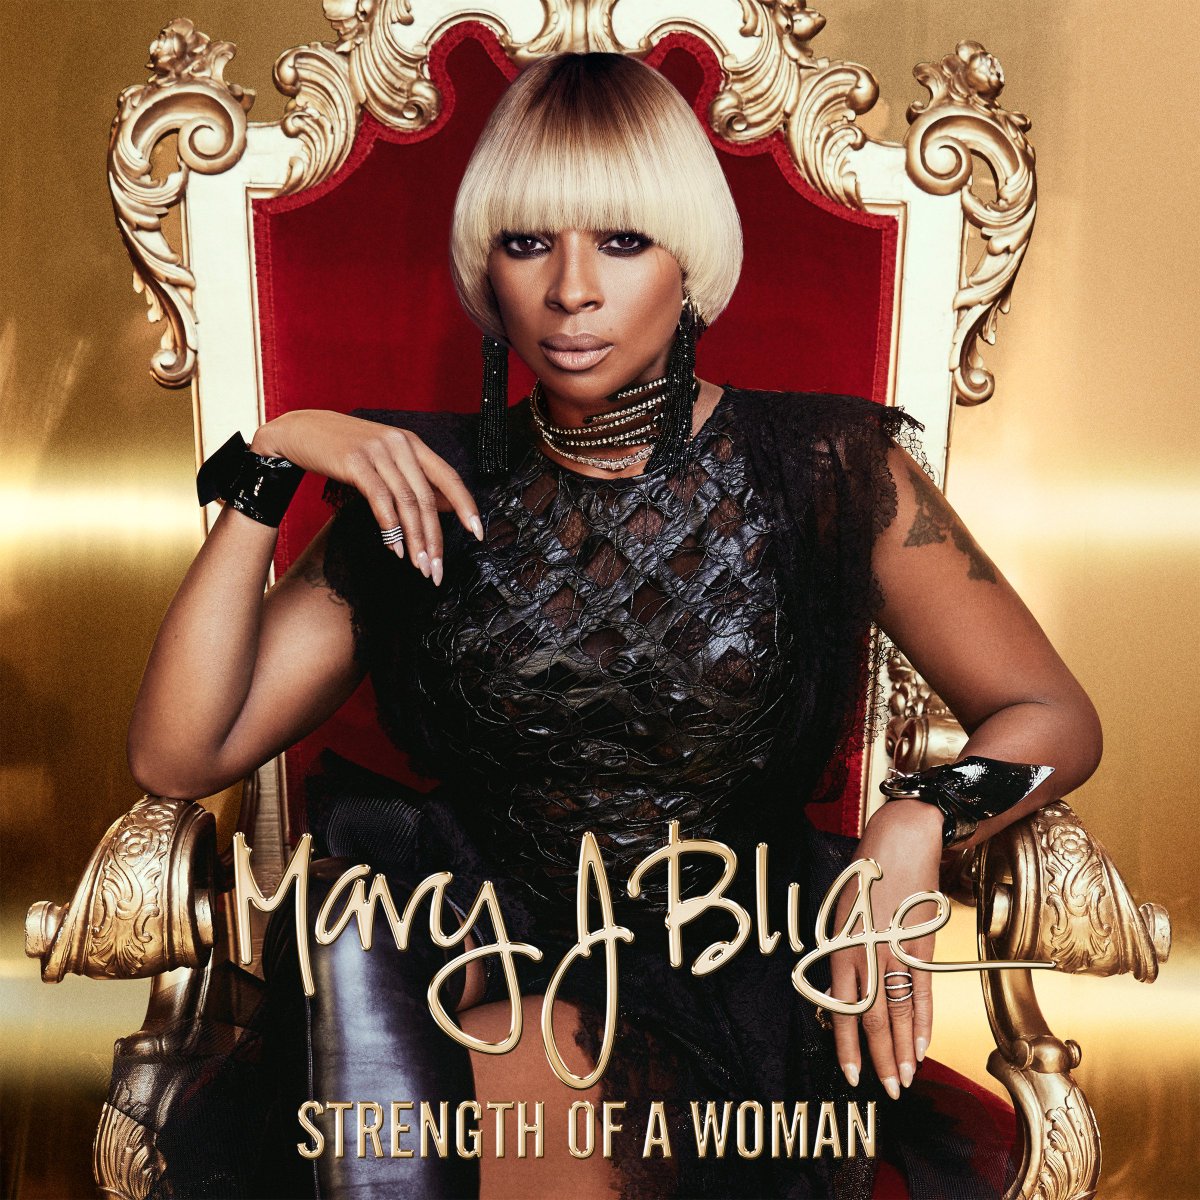 Only 3 more weeks until #STRENGTHOFAWOMAN drops. You can pre-order it now here: https://t.co/xSeuiUkRgg https://t.co/uJamUoenMR